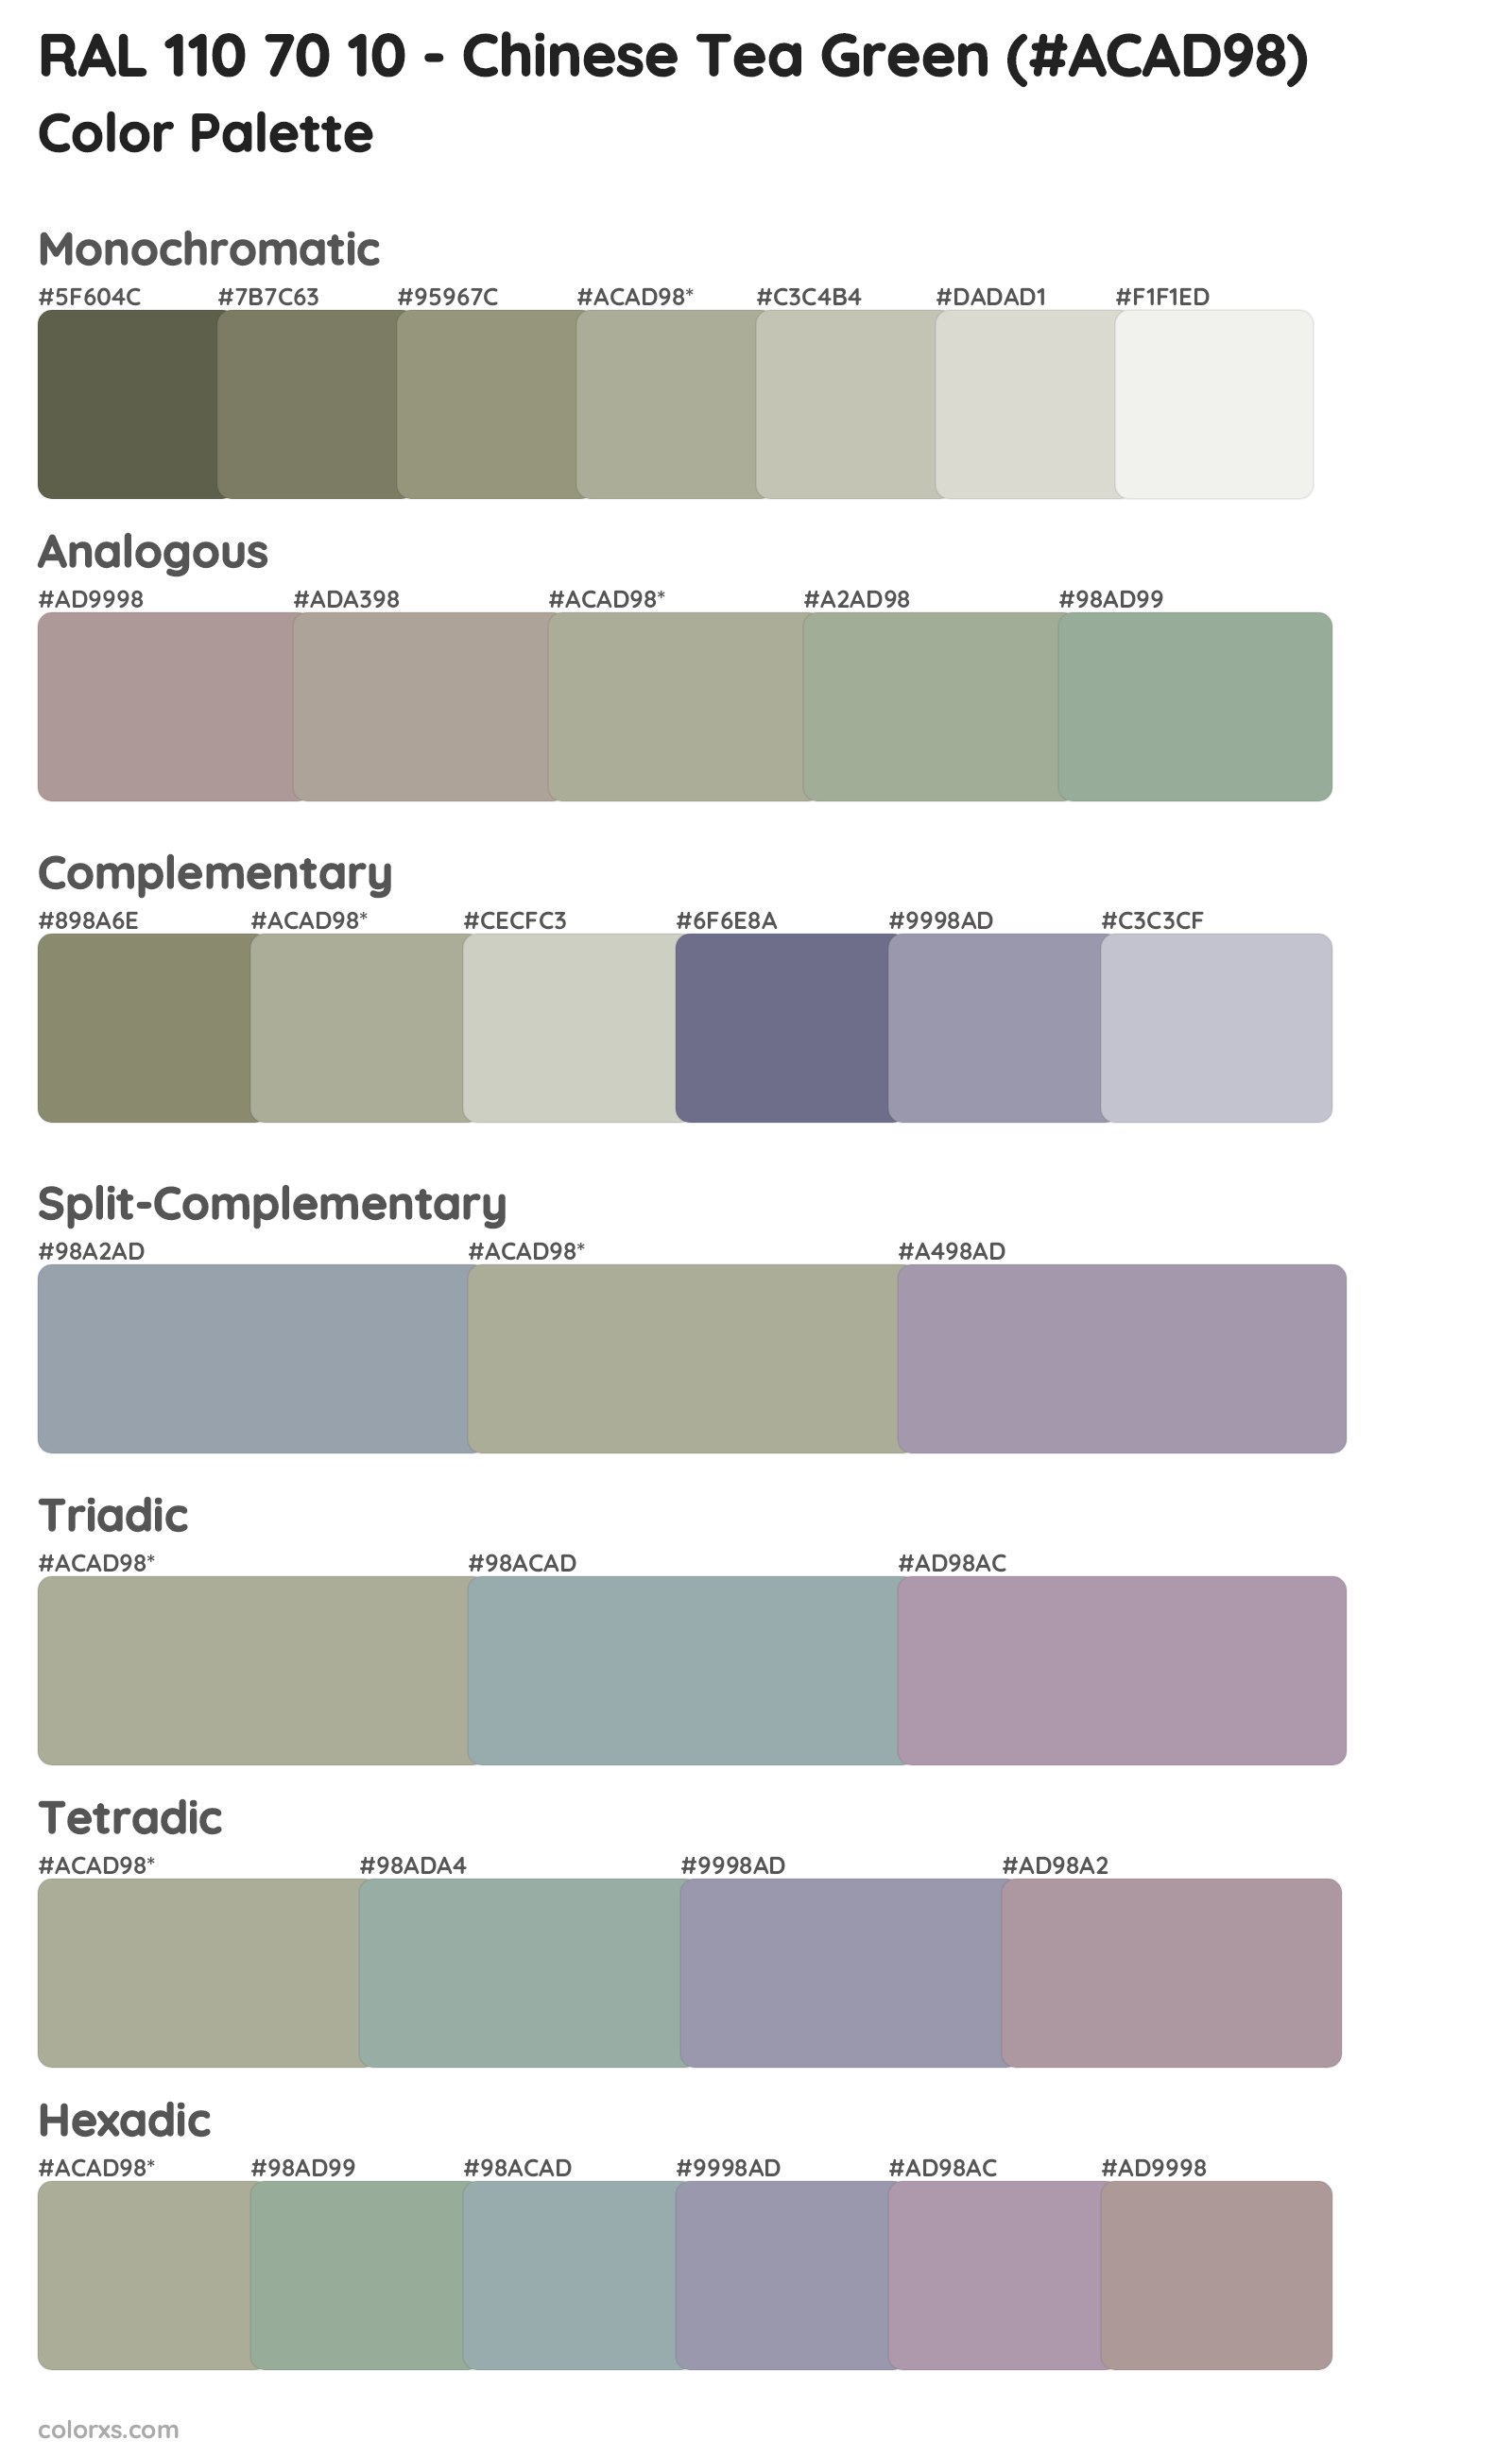 RAL 110 70 10 - Chinese Tea Green Color Scheme Palettes